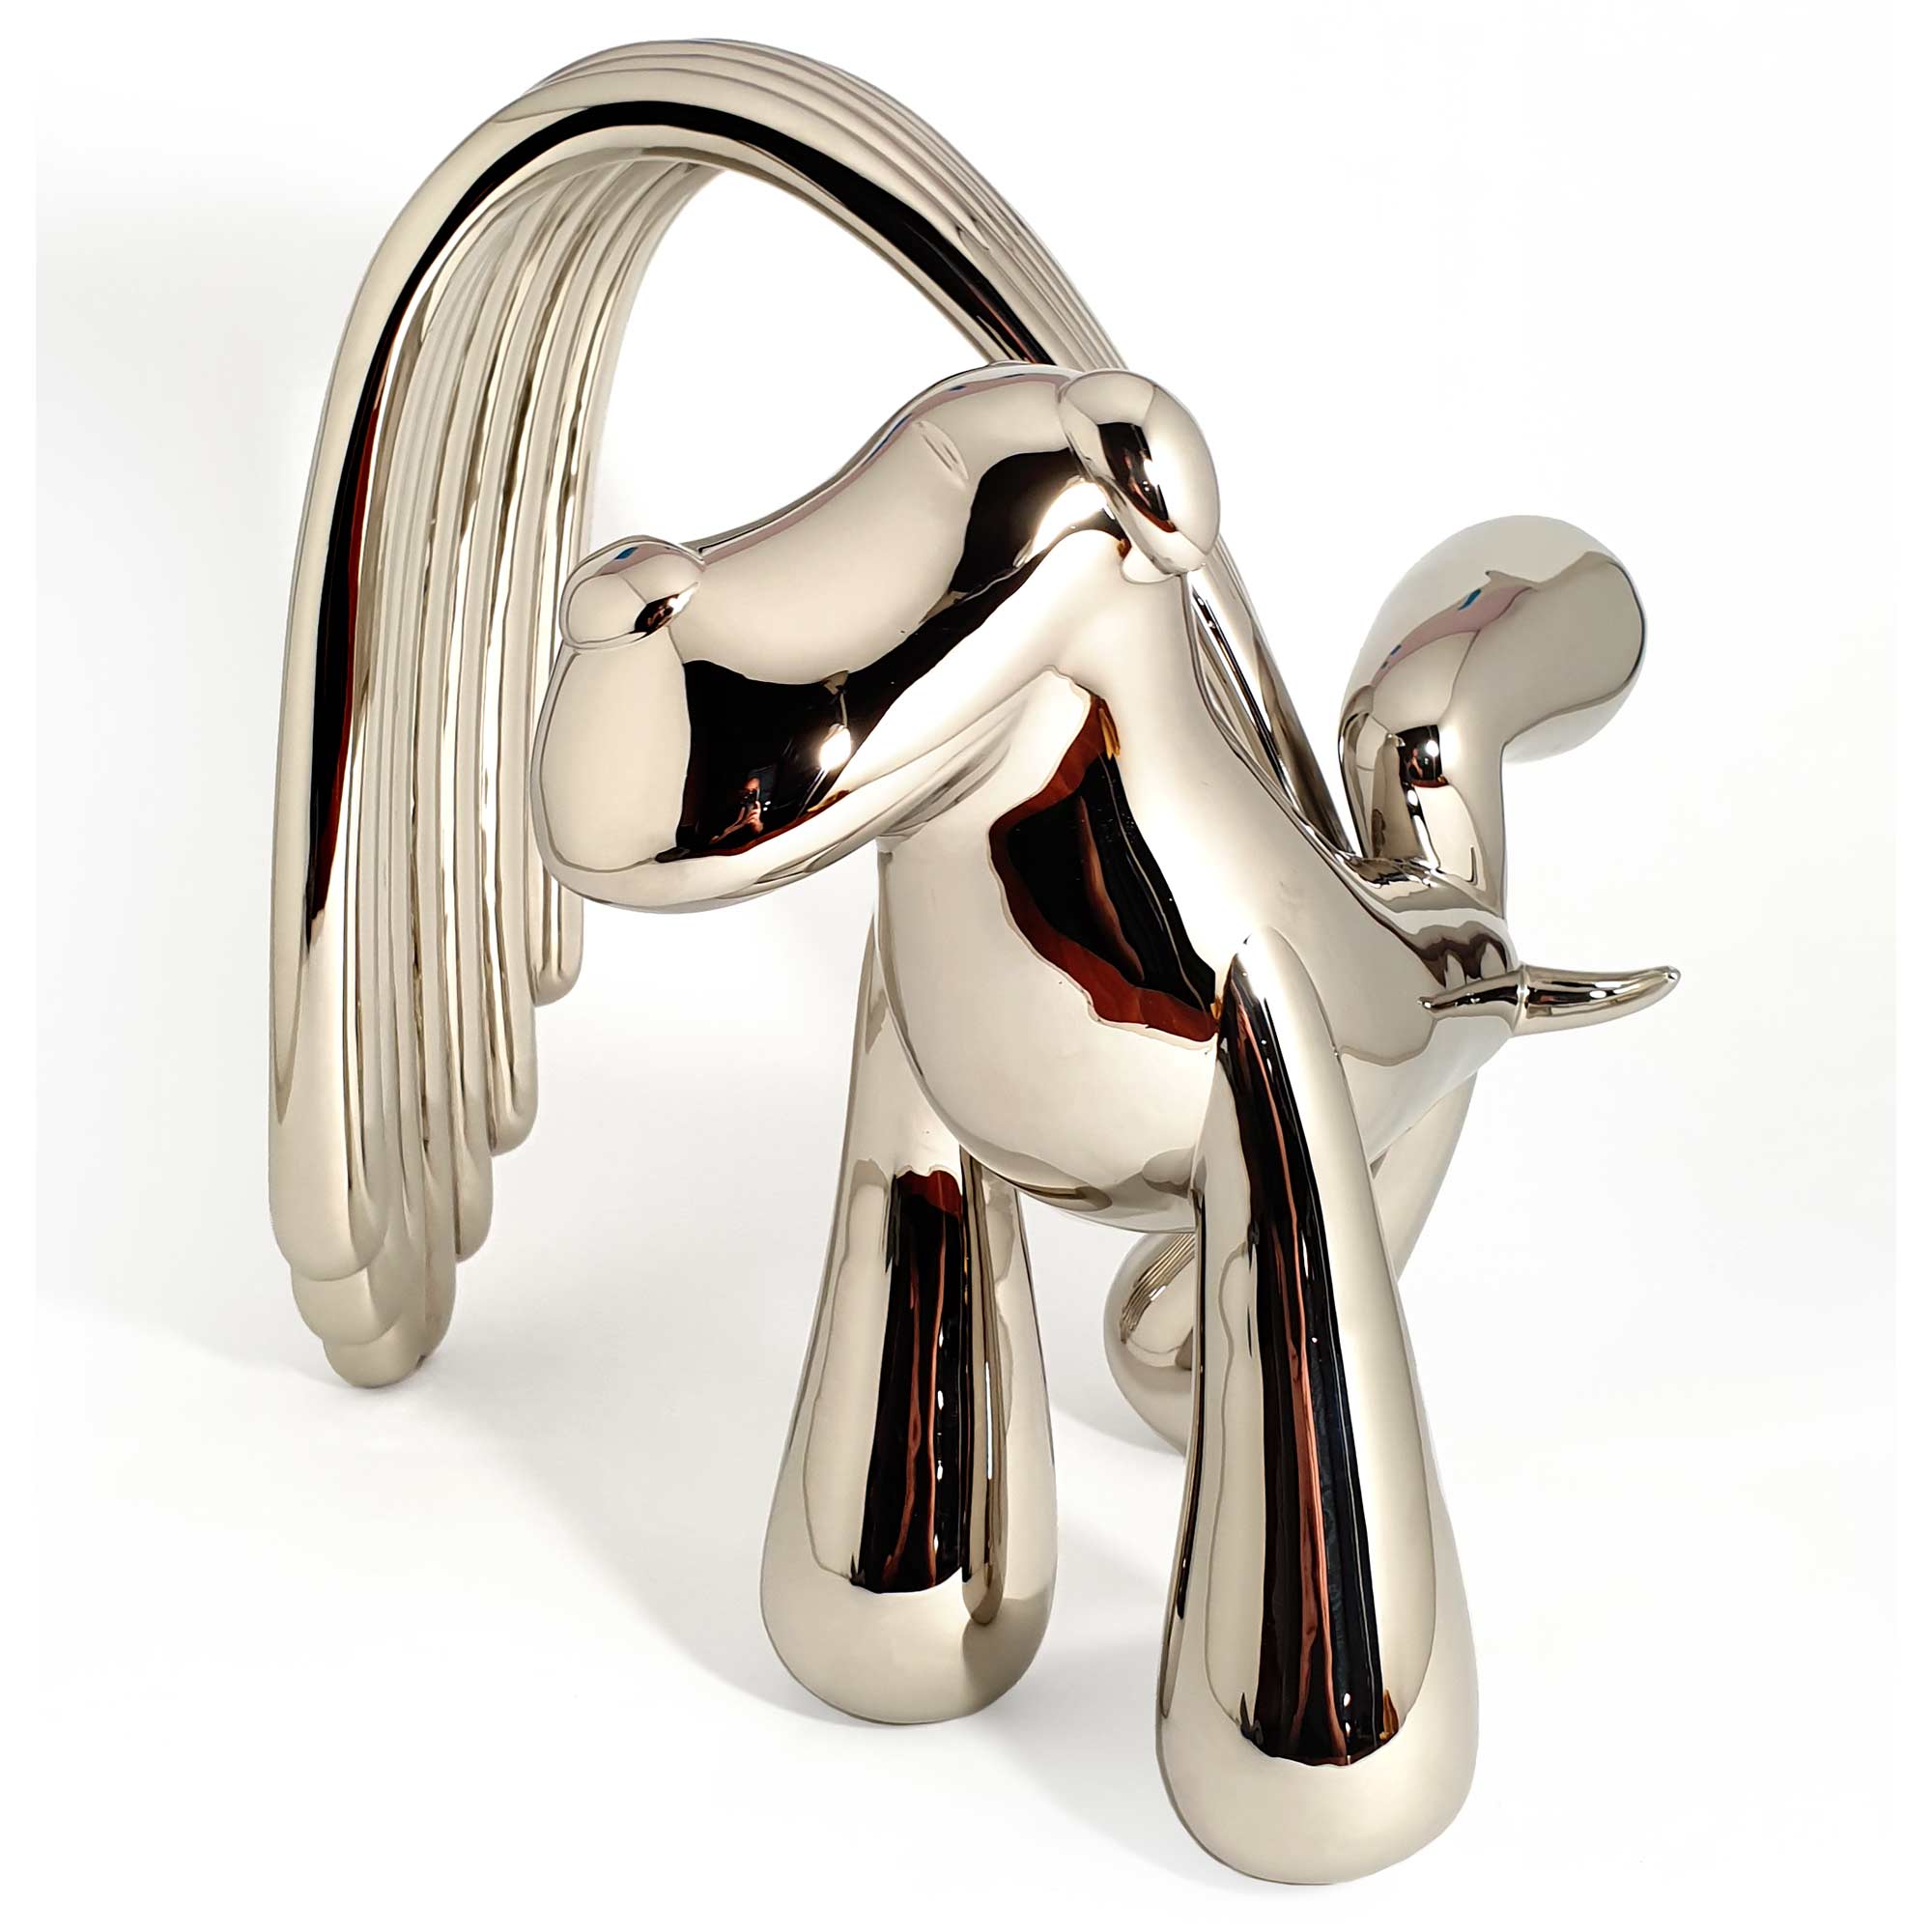 Over the Rainbow, dog sculpture, Mirror Polished Stainless Steel Sculpture, by artist Ferdi B Dick, sides views